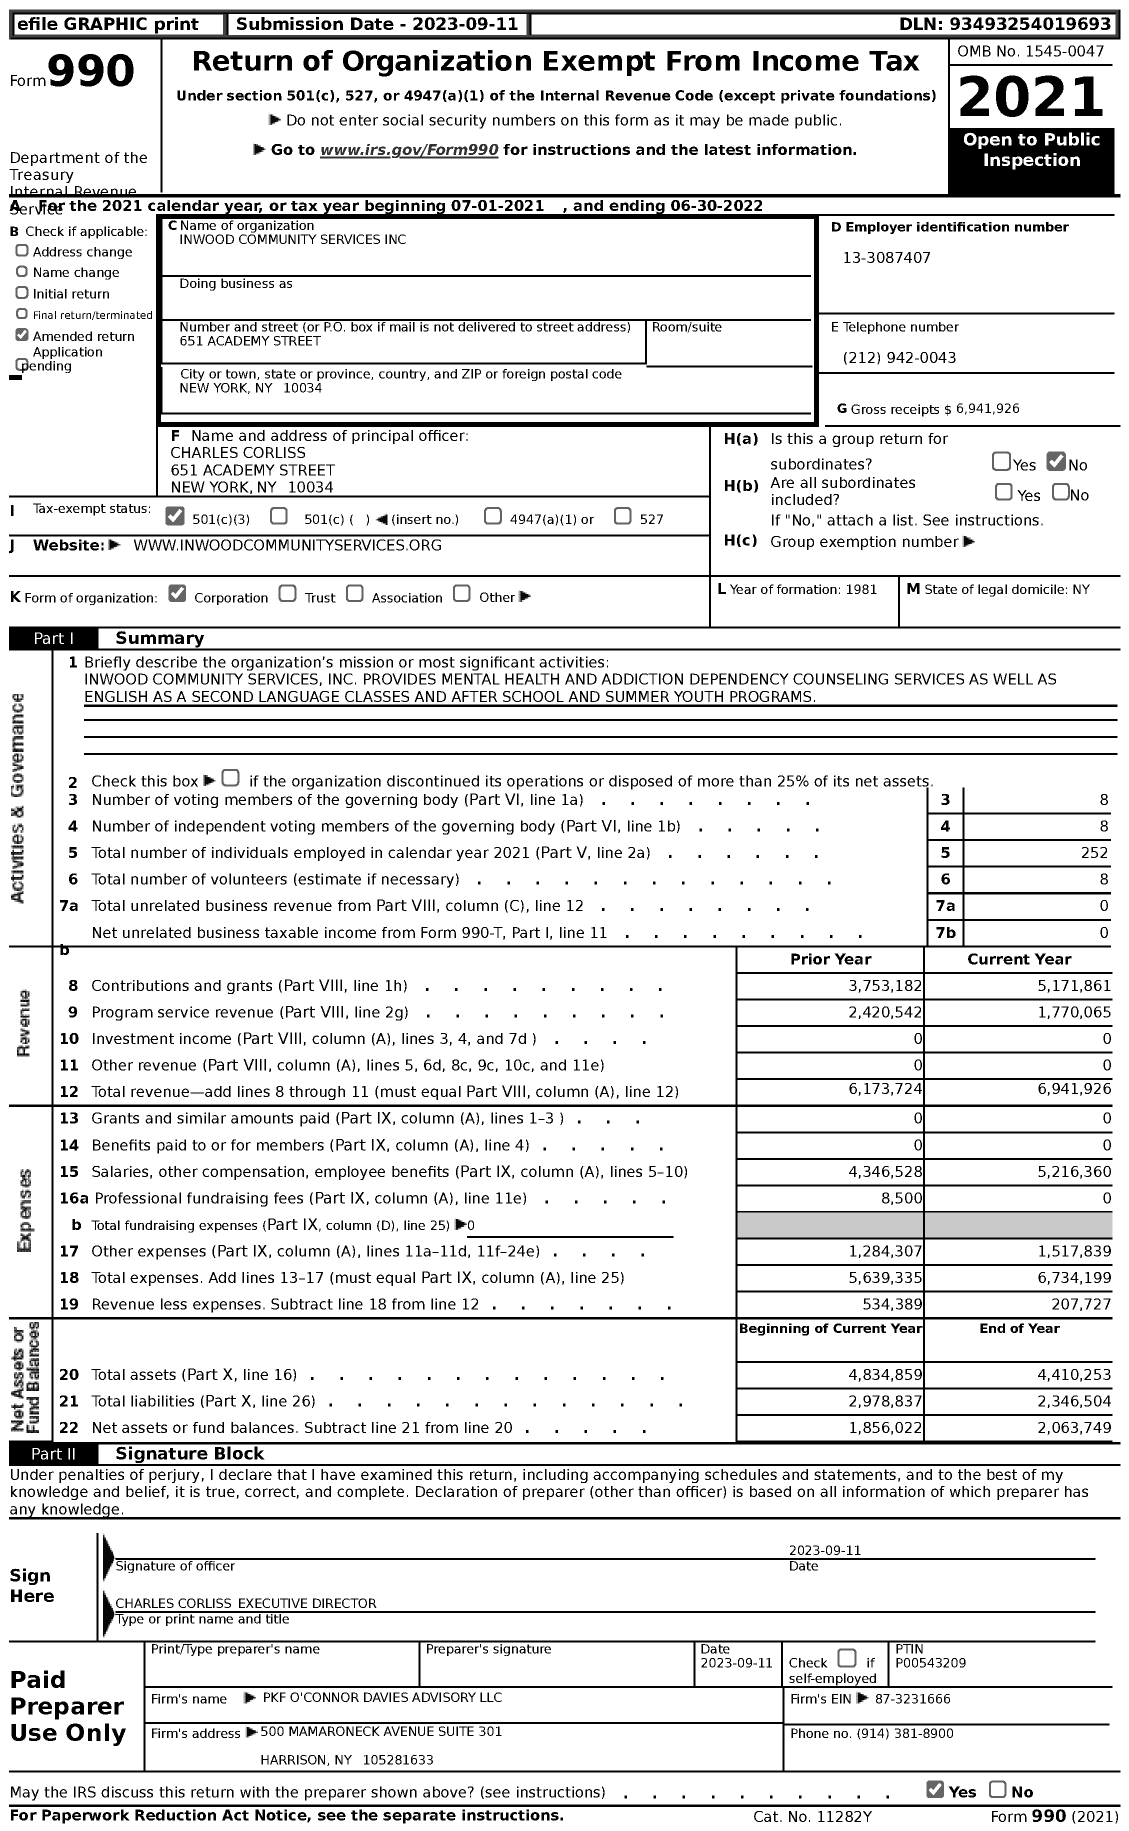 Image of first page of 2021 Form 990 for Inwood Community Services (ICS)